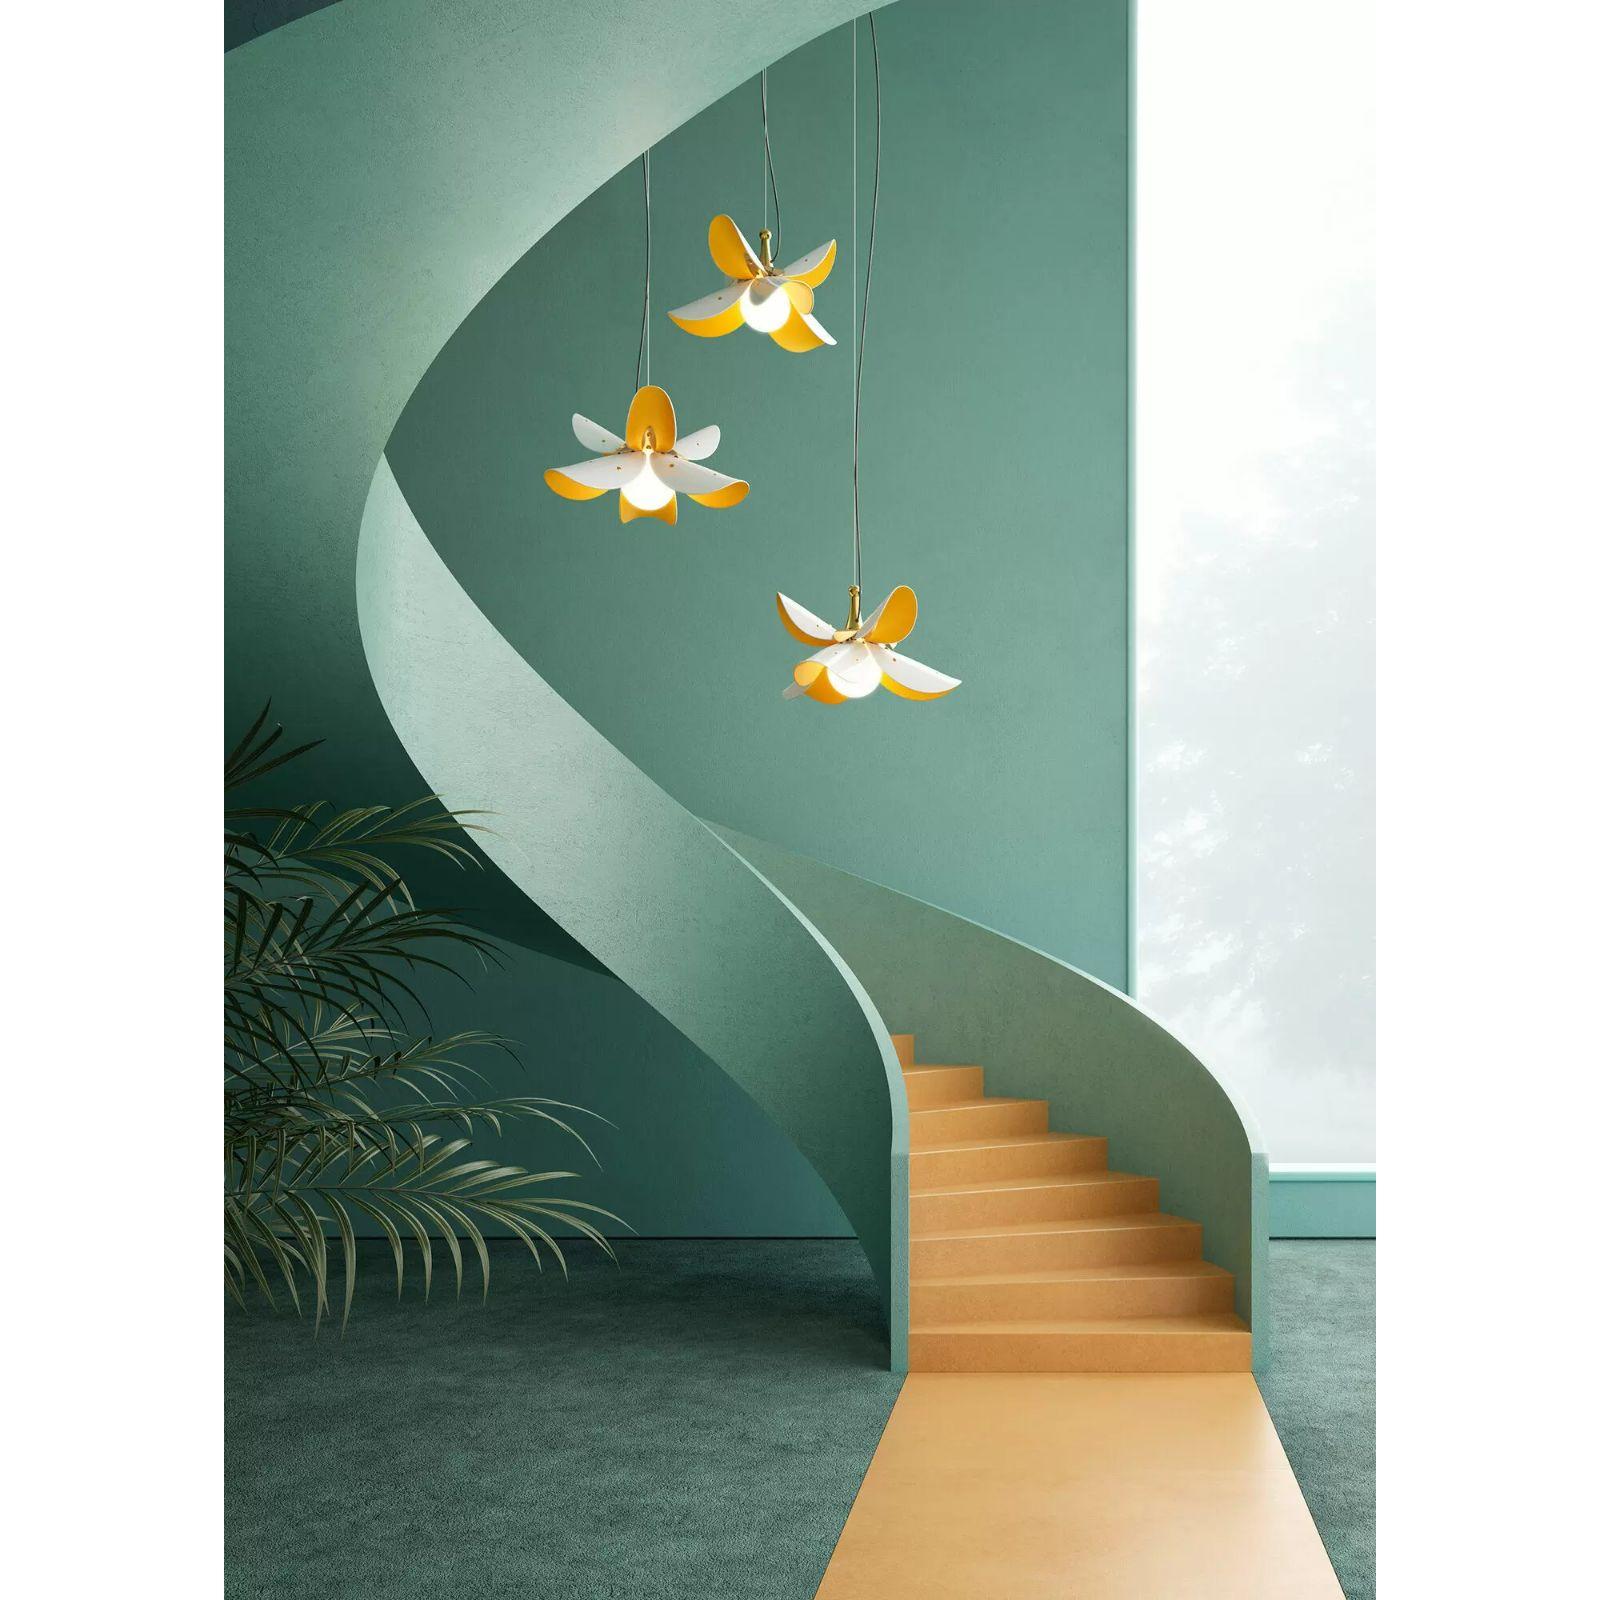 Hanging lamp from the Blossom collection, inspired by the blossoming of flowers in spring, made entirely in porcelain.

Nature, an inexhaustible source of beauty, gives rise to this collection of lamps which evoke the moment when flowers open with